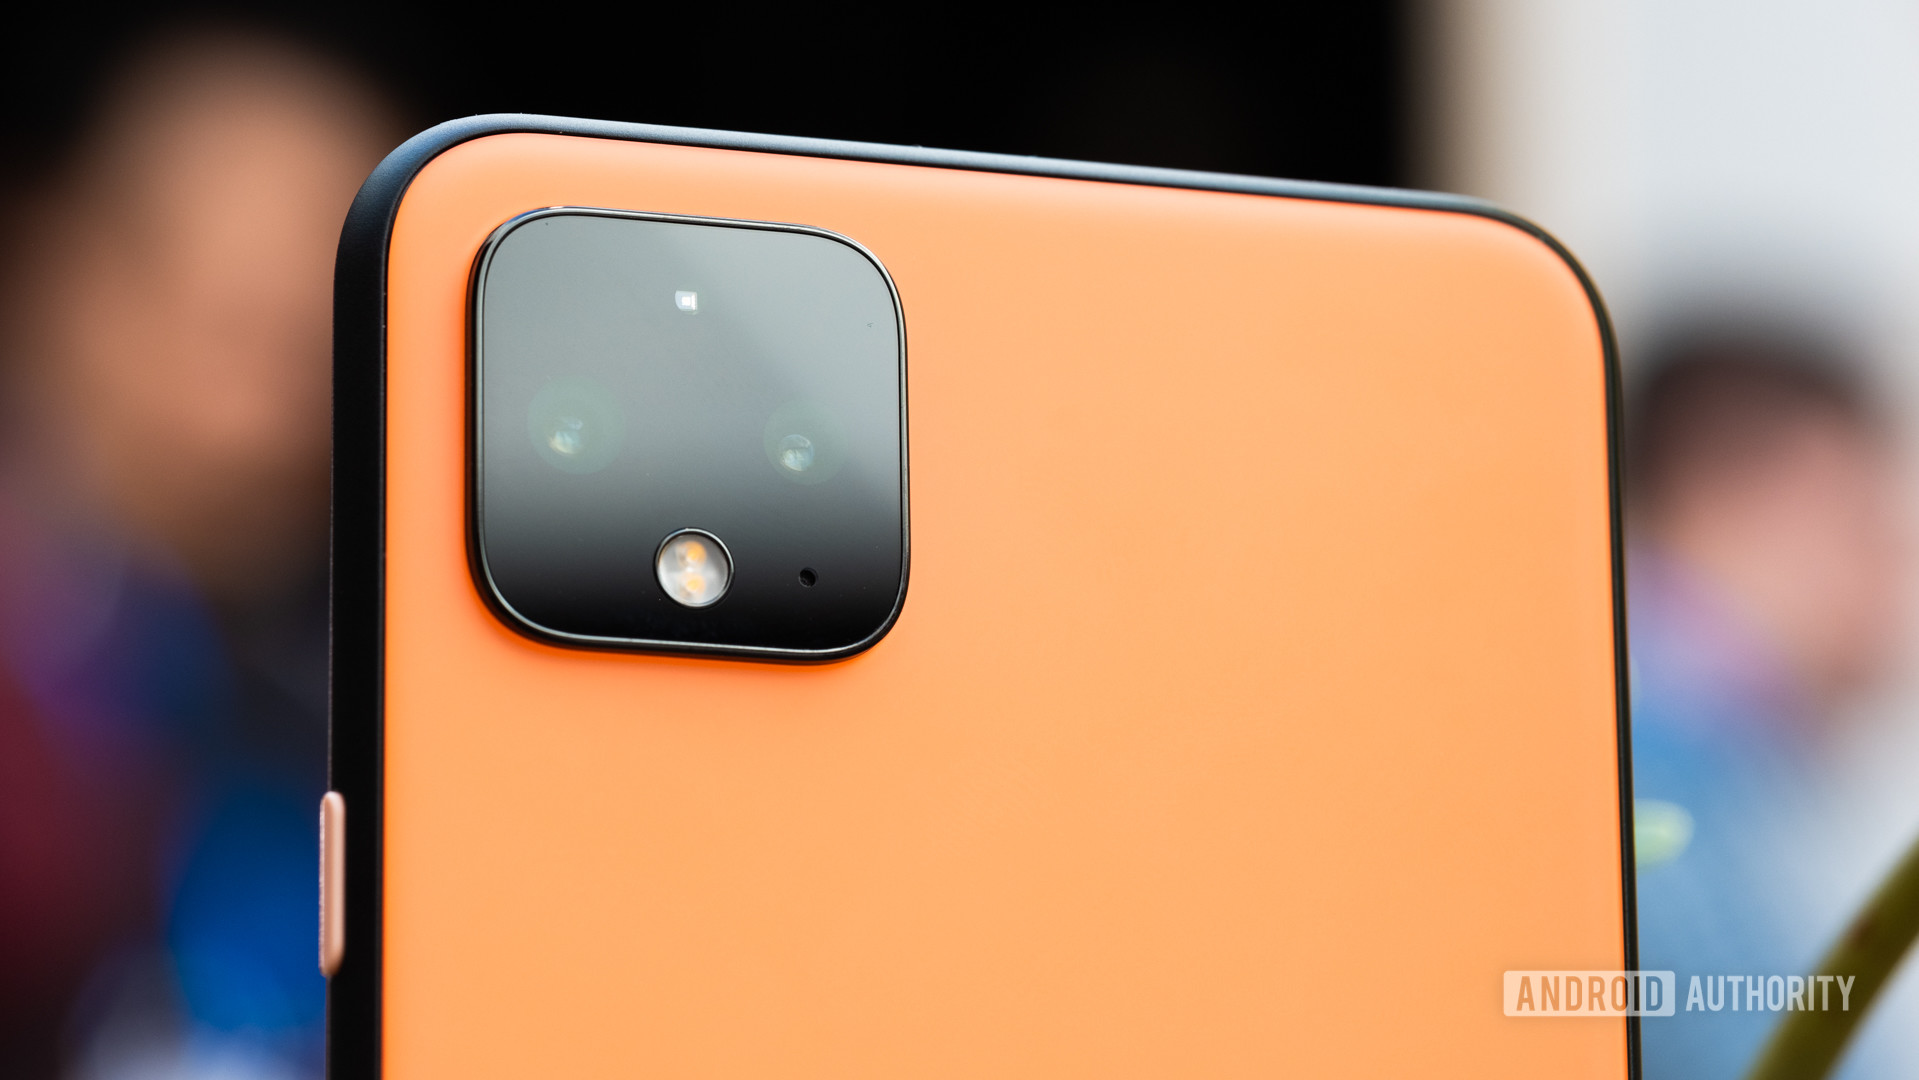 The Google Pixel 4 astrophotography mode is coming to older Pixels too.